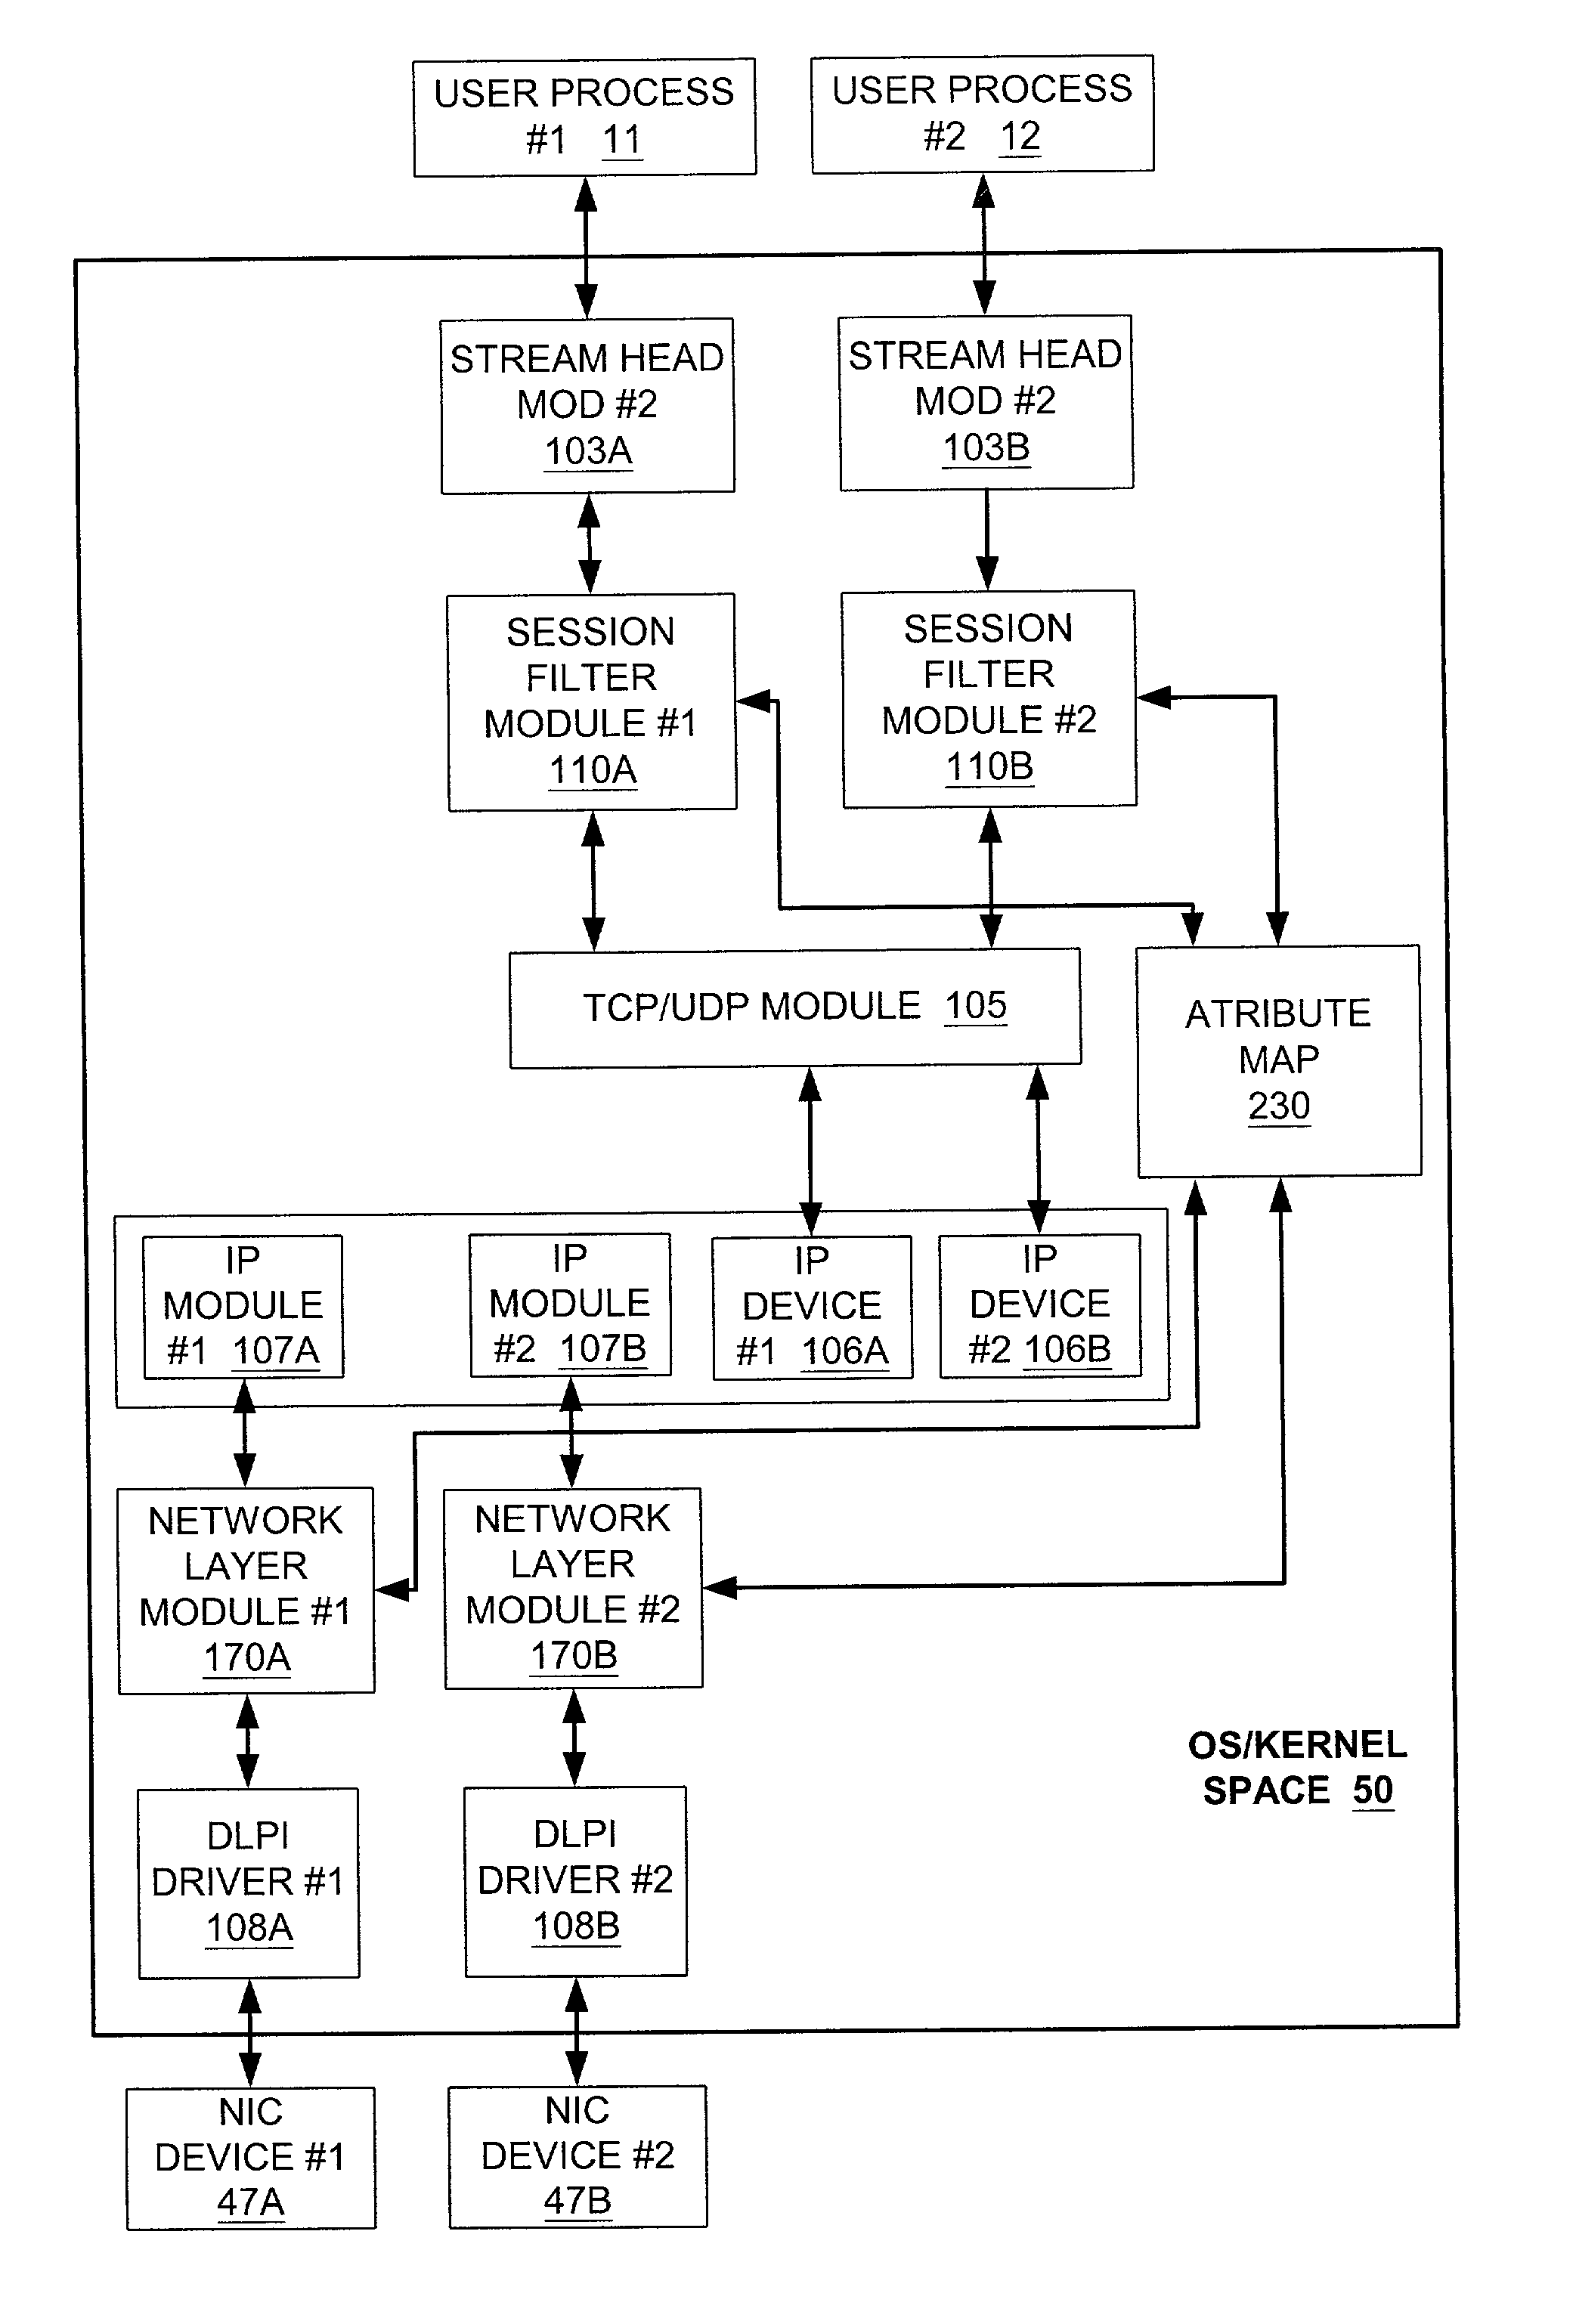 System and method for a group-based network access control for a computer